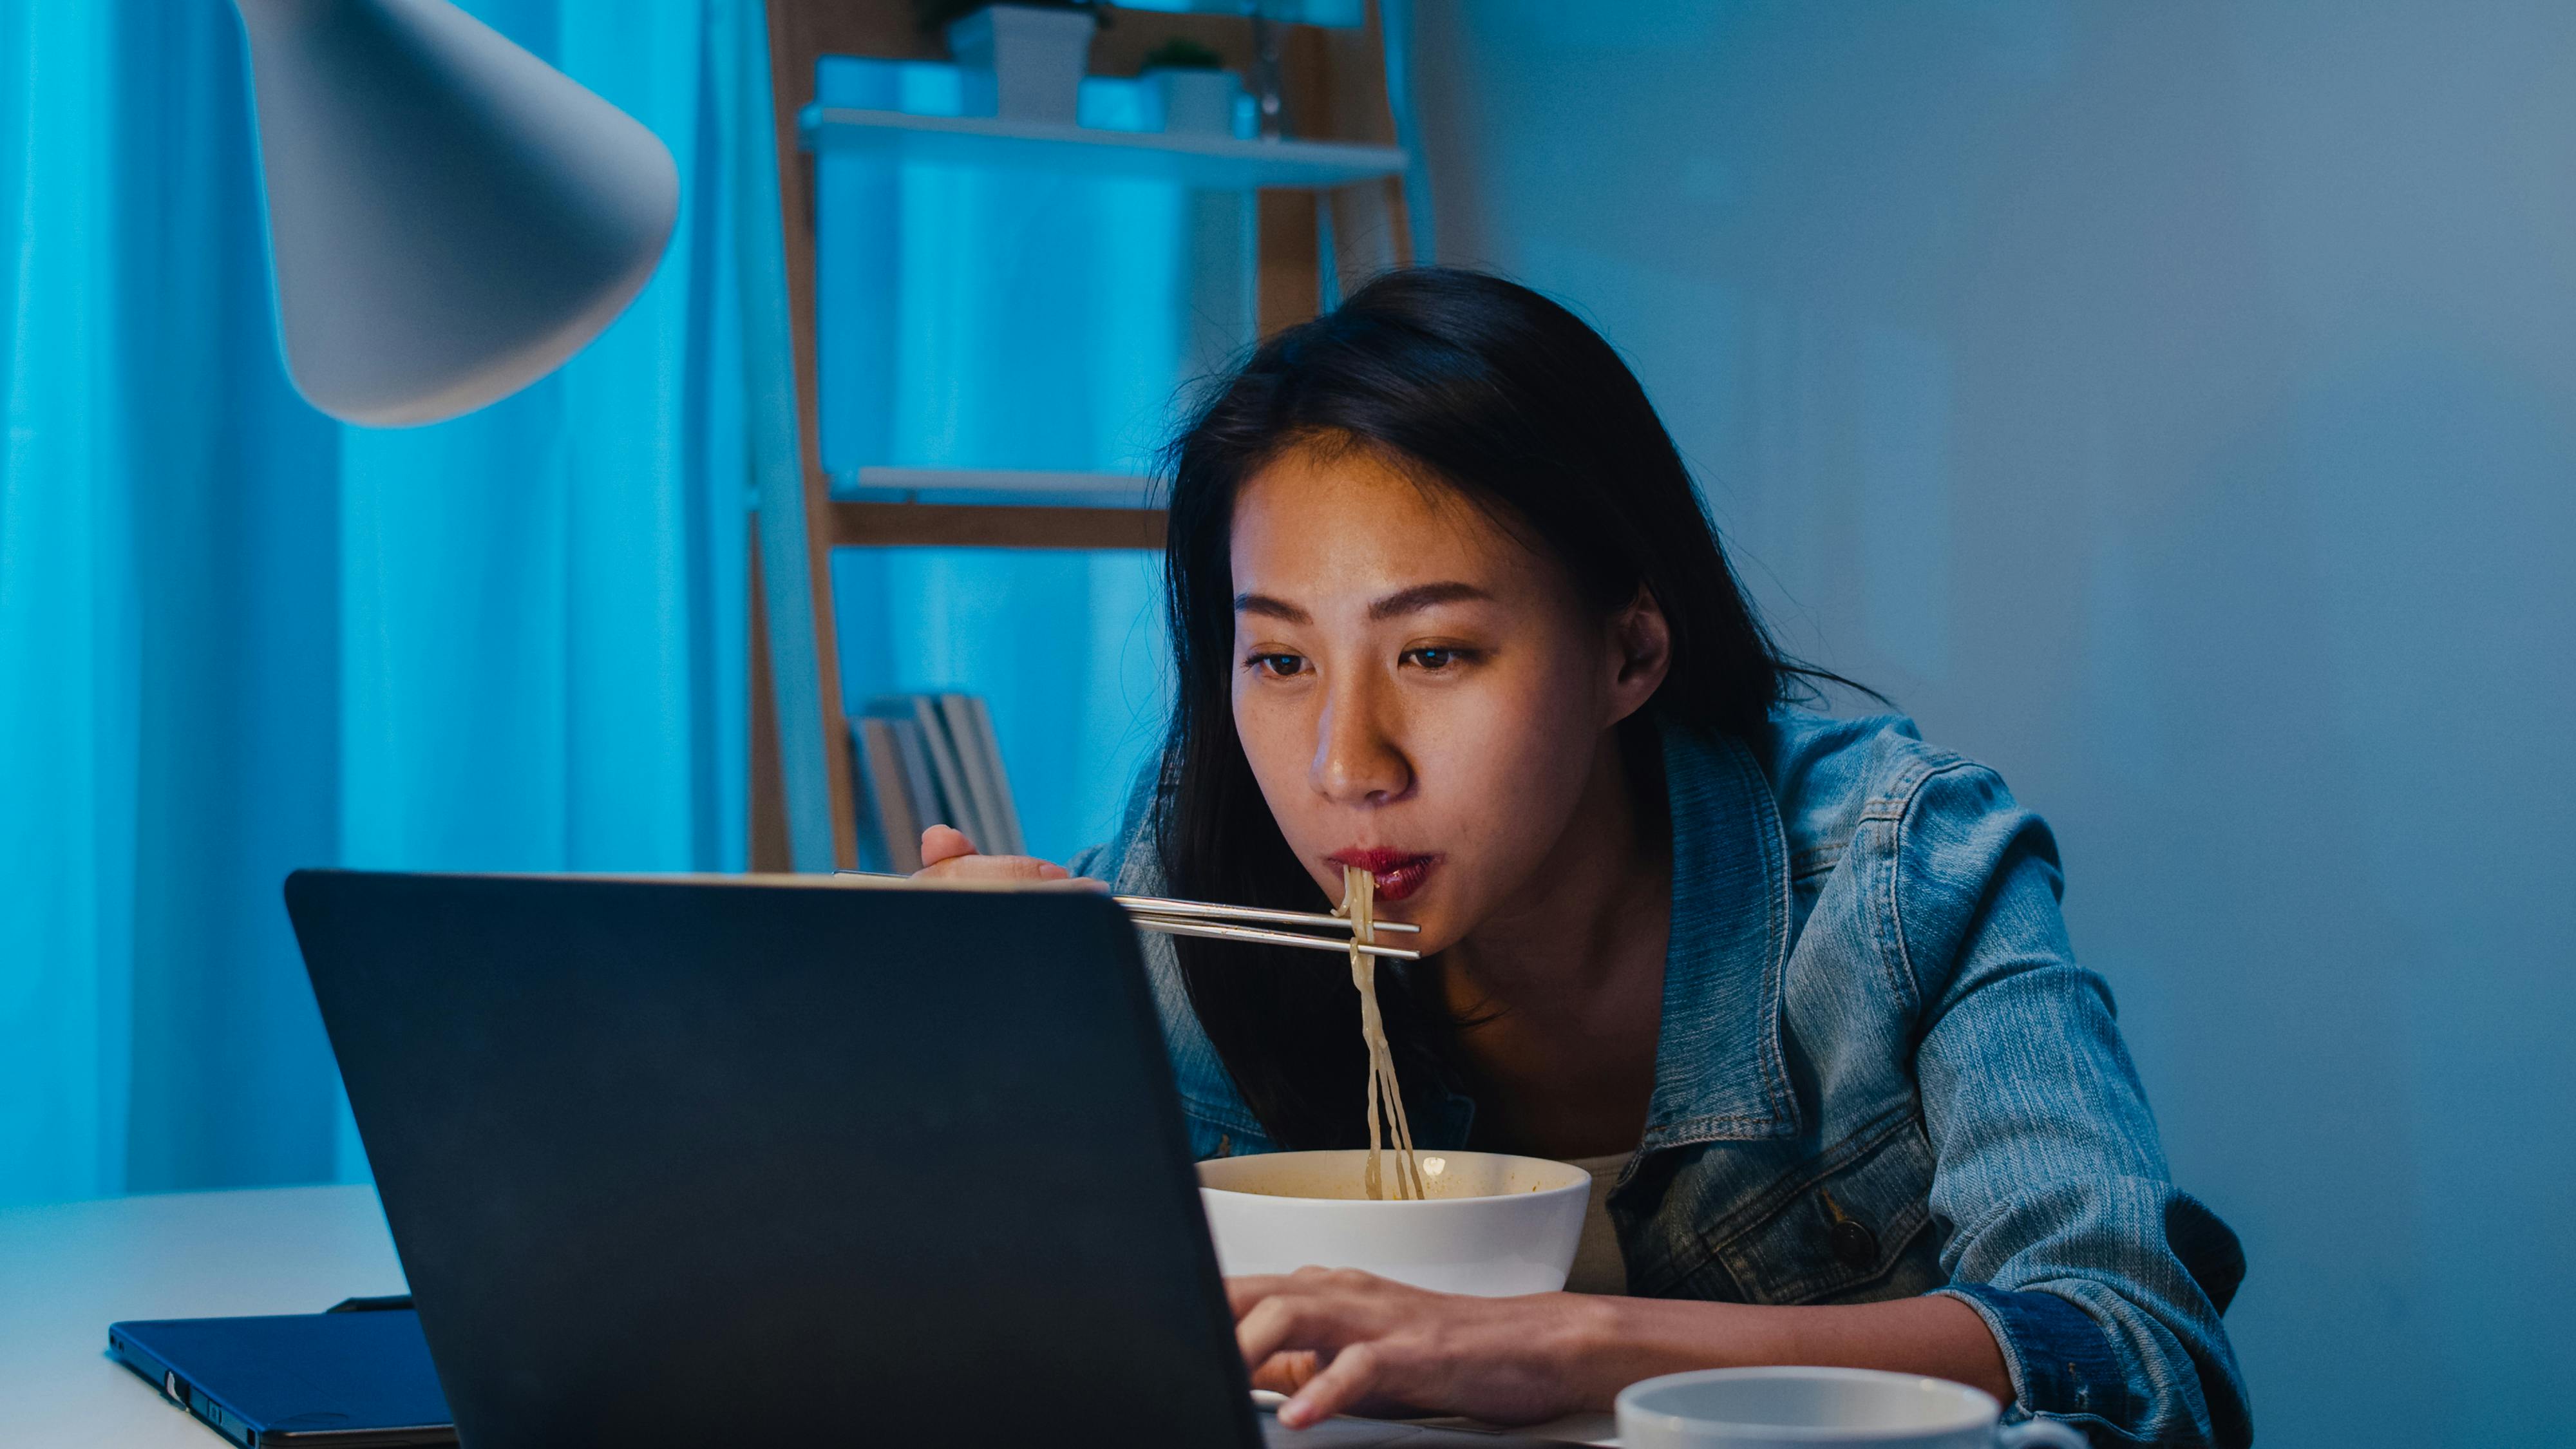 Woman eating noodle soup in front of a laptop at night